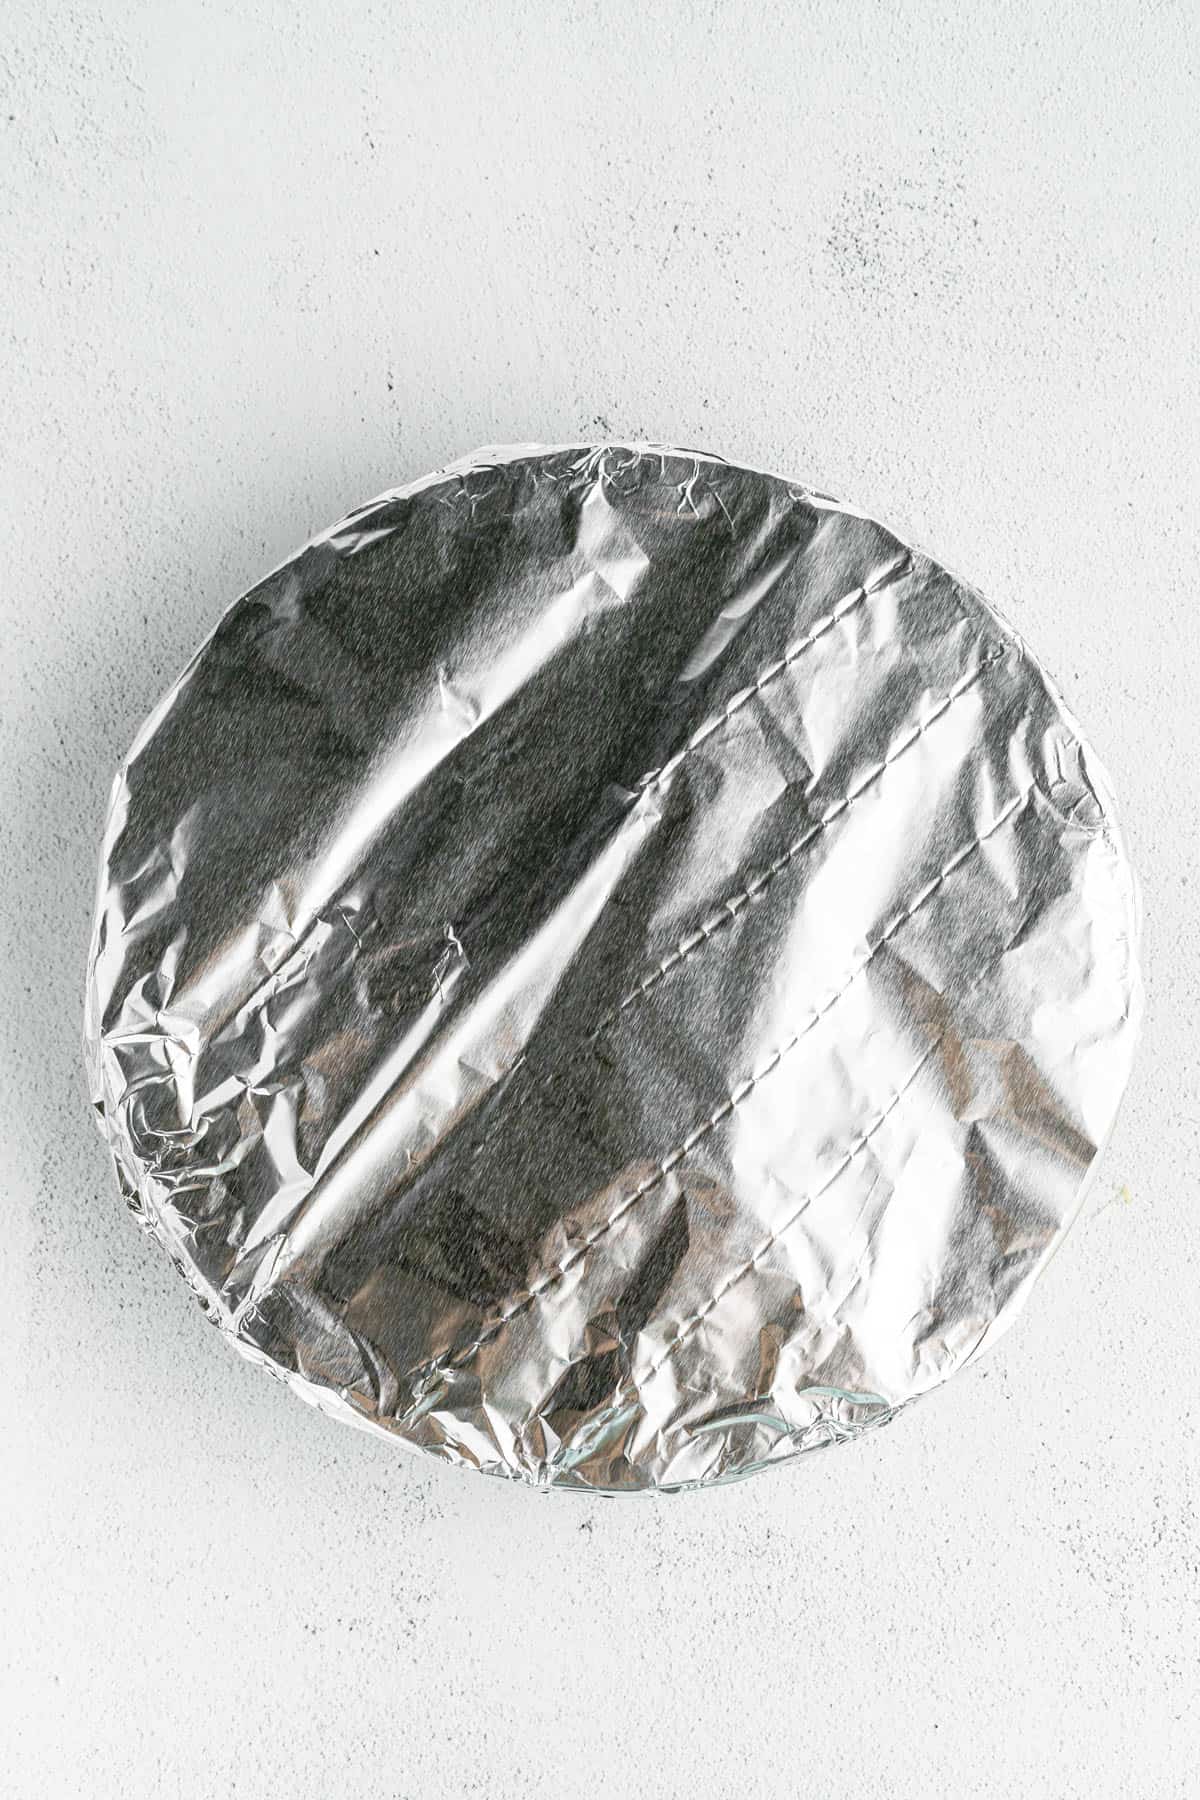 Foil covering spaghetti pie before baking.